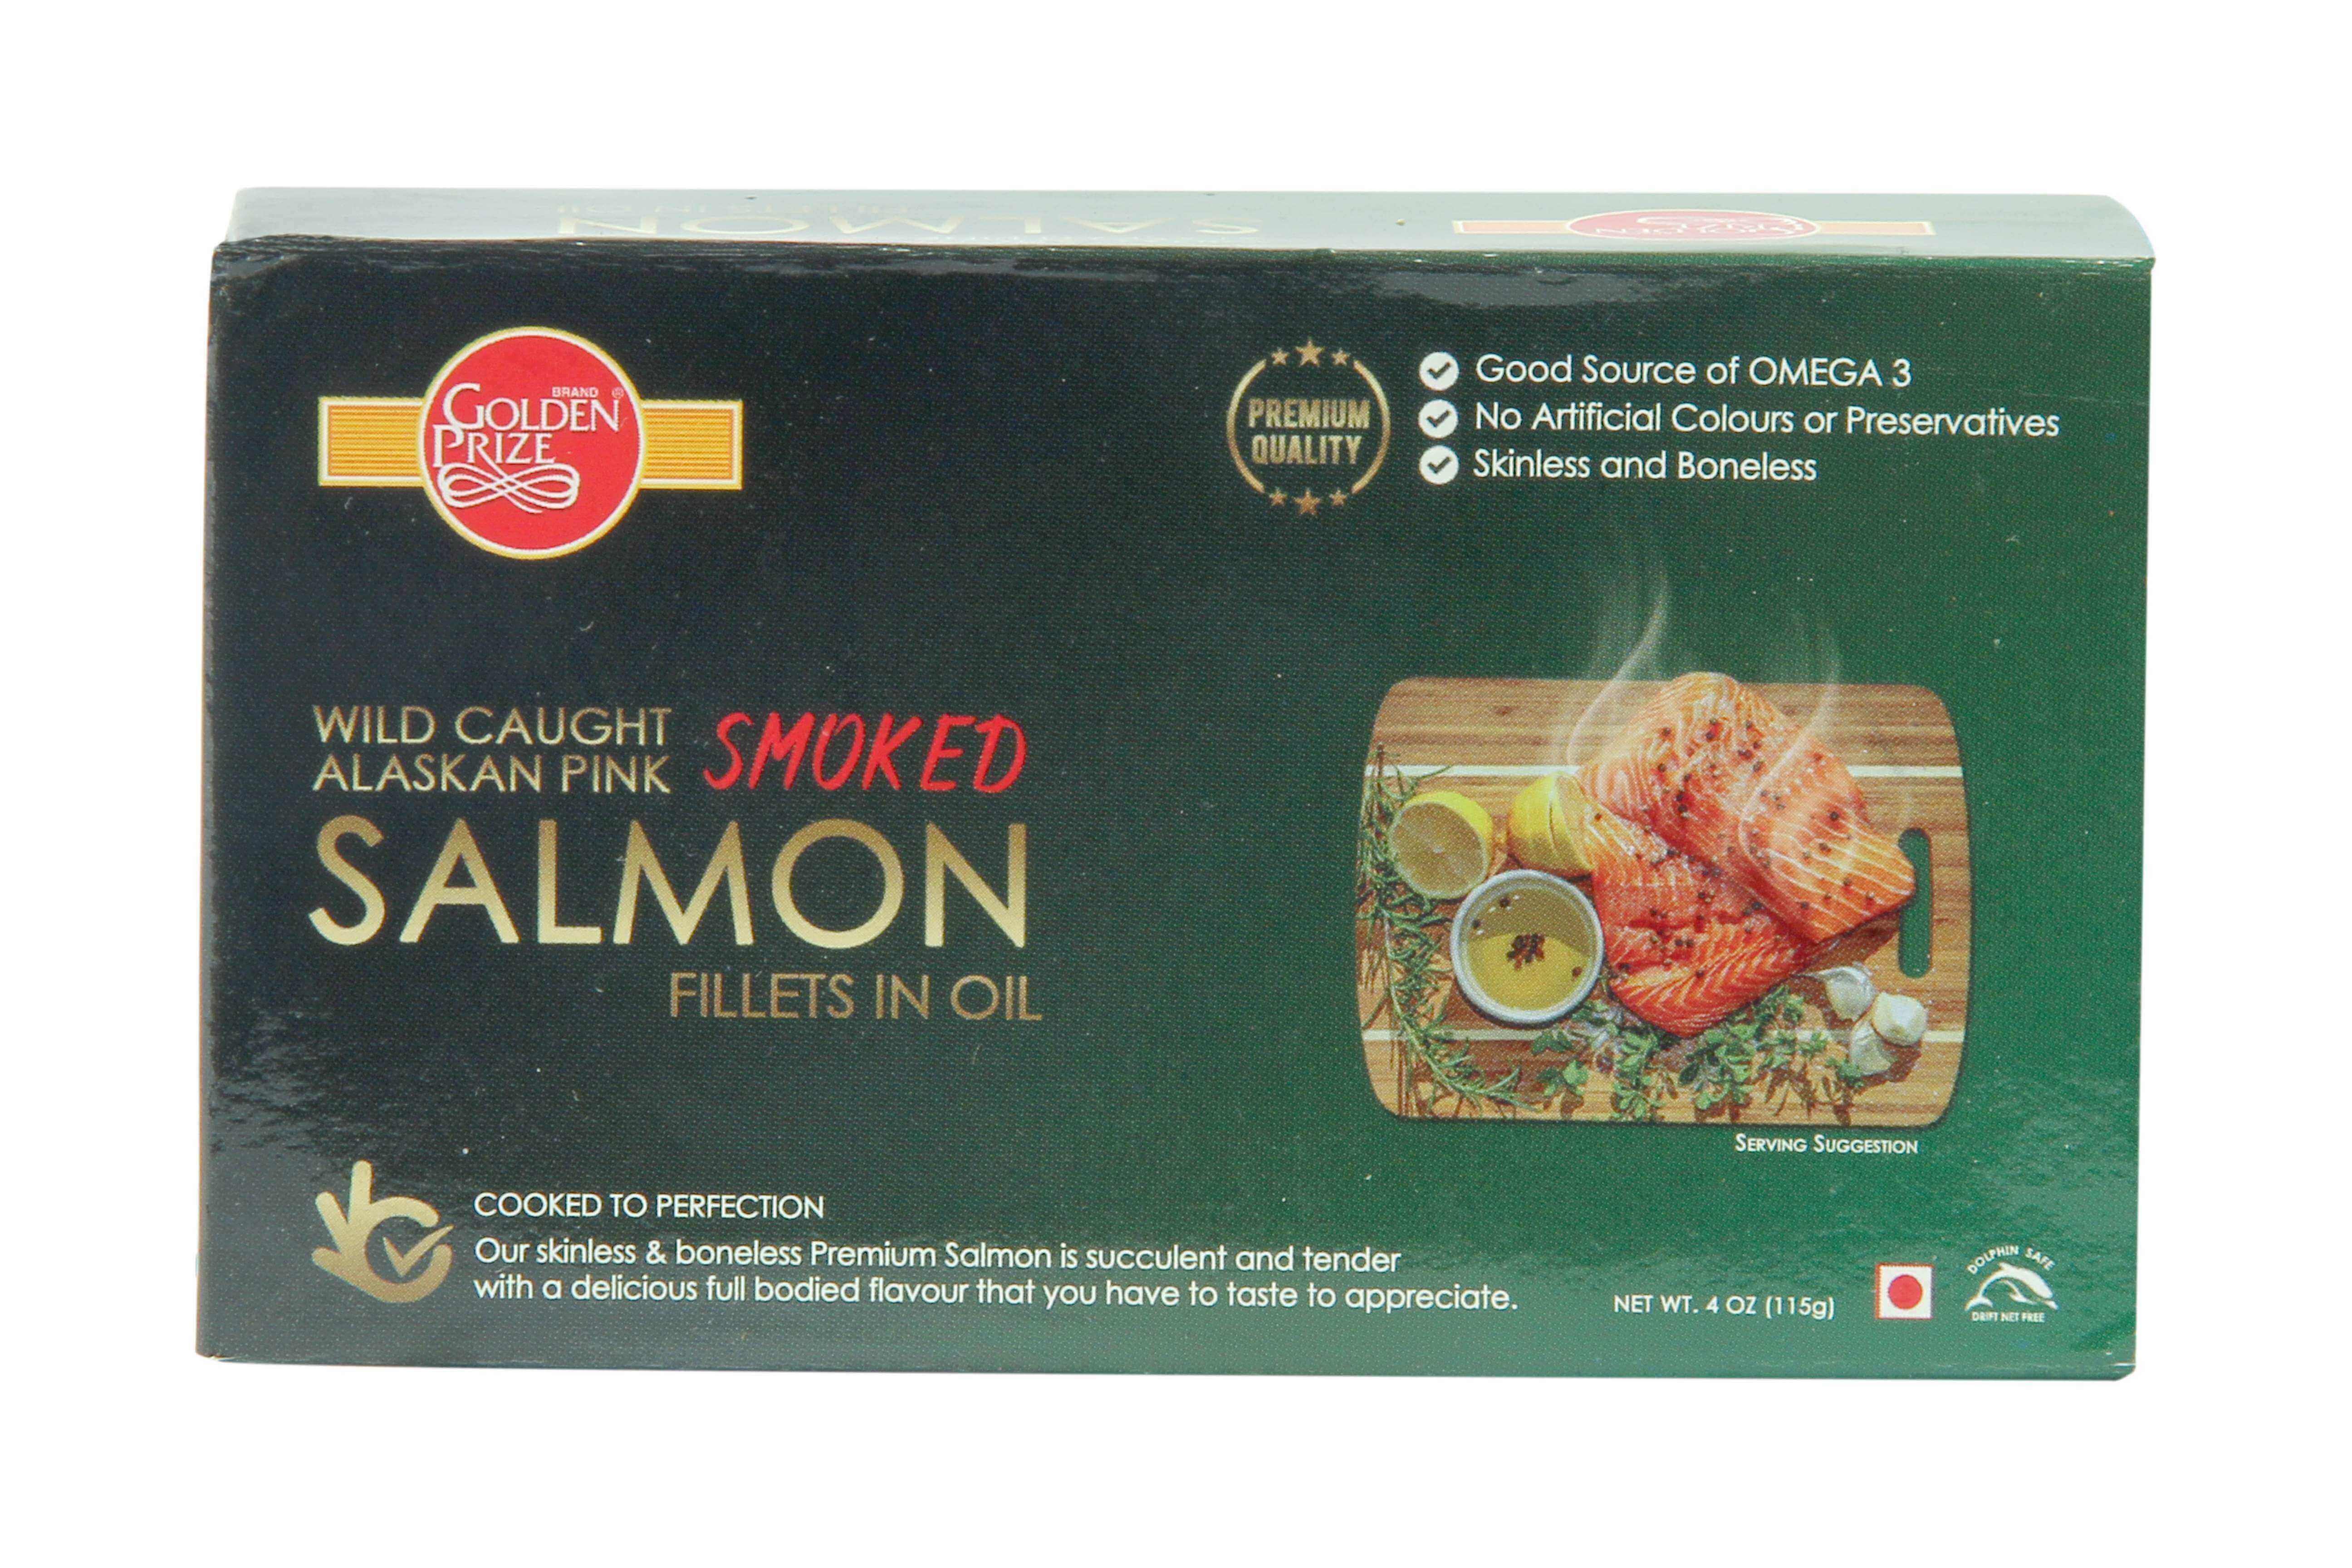 Smoked Salmon Fillets in Oil